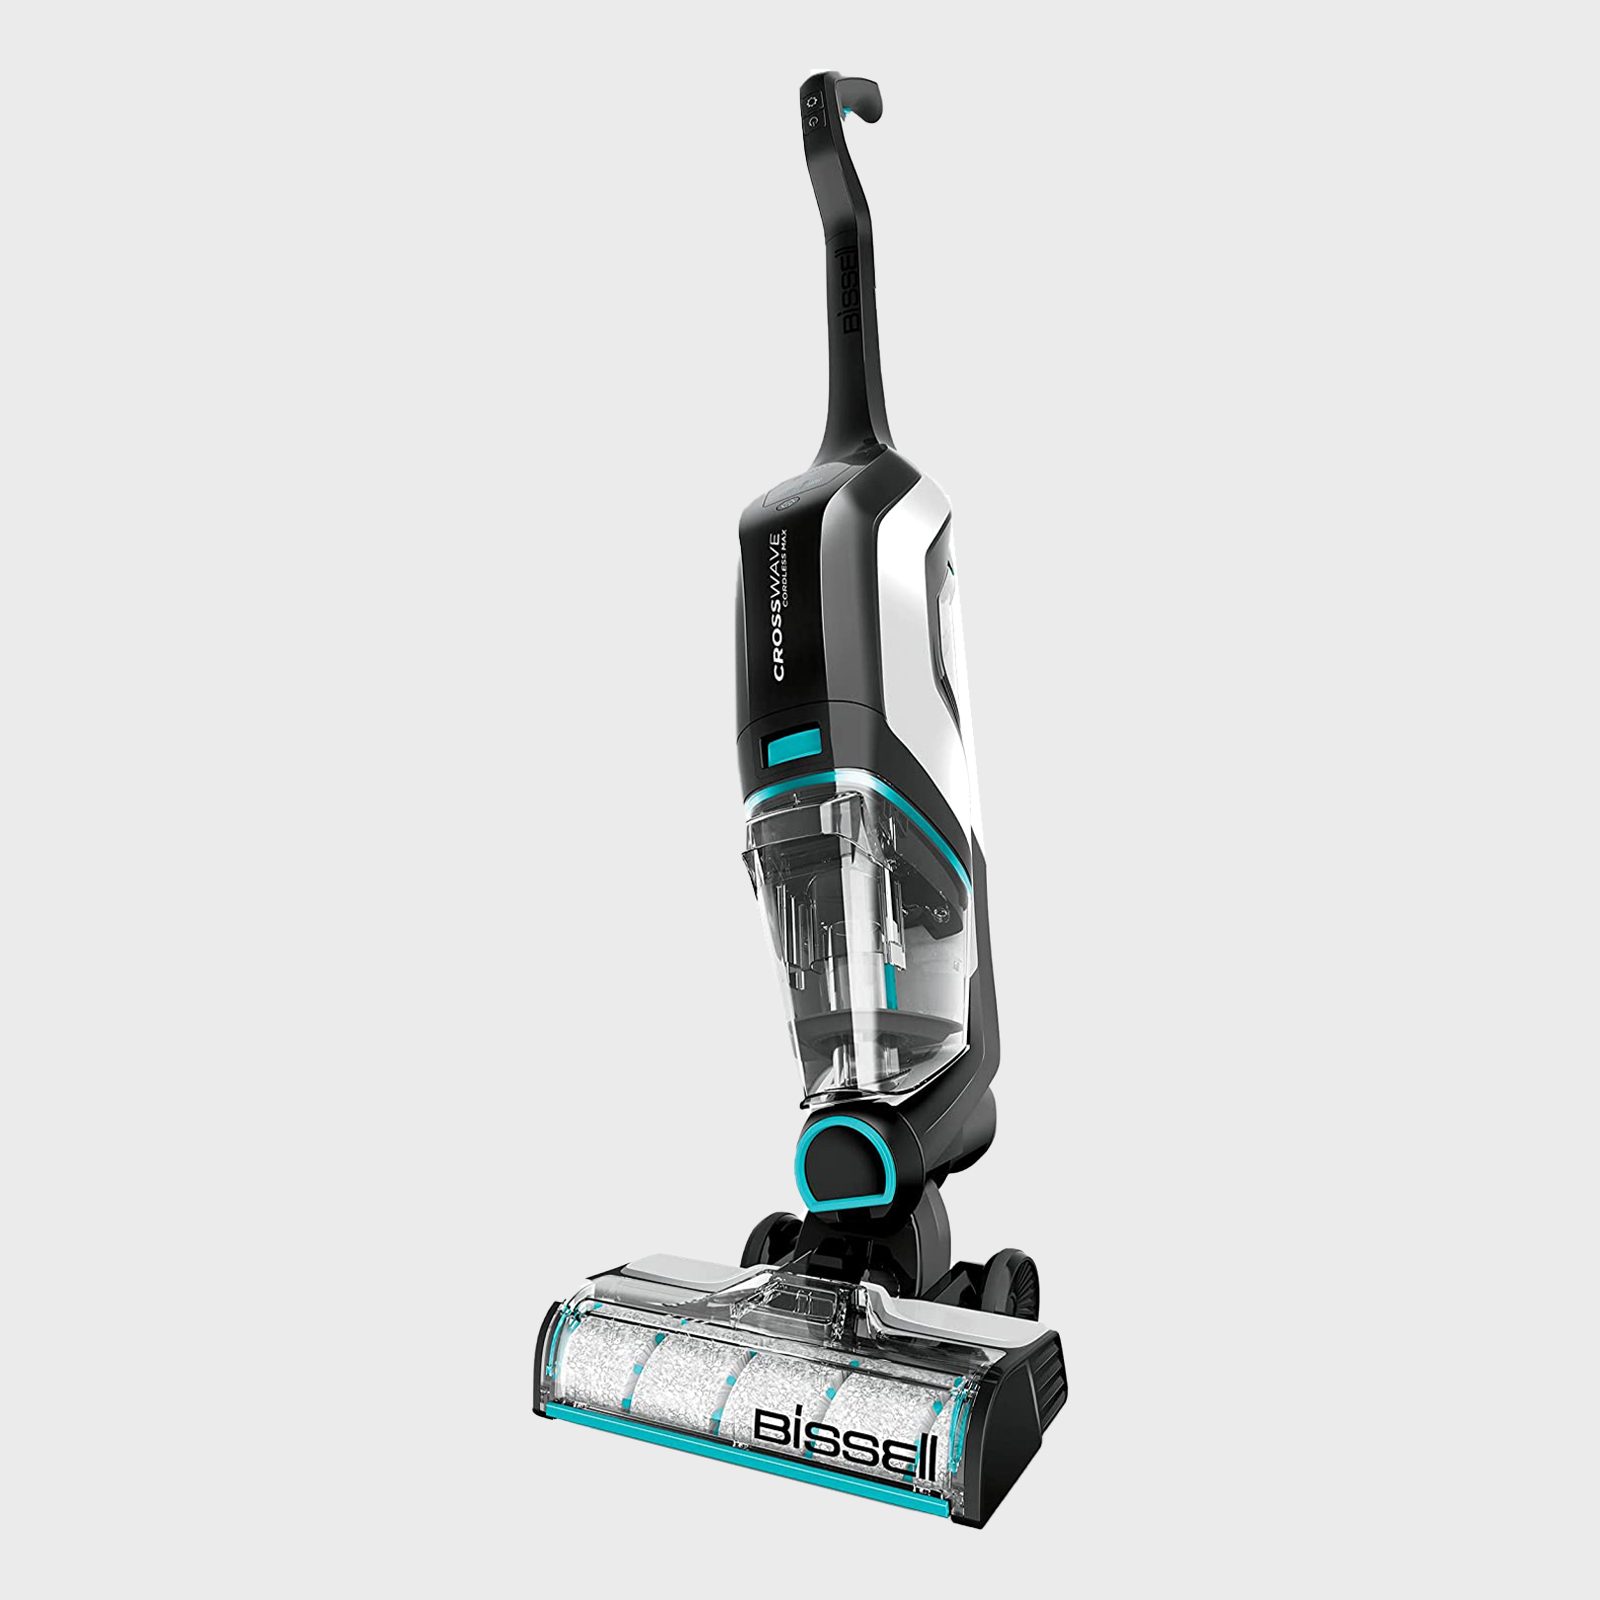 https://www.rd.com/wp-content/uploads/2021/06/bissell-2554a-crosswave-cordless-max-vacuum-ecomm-via-amazon.jpg?fit=700%2C700